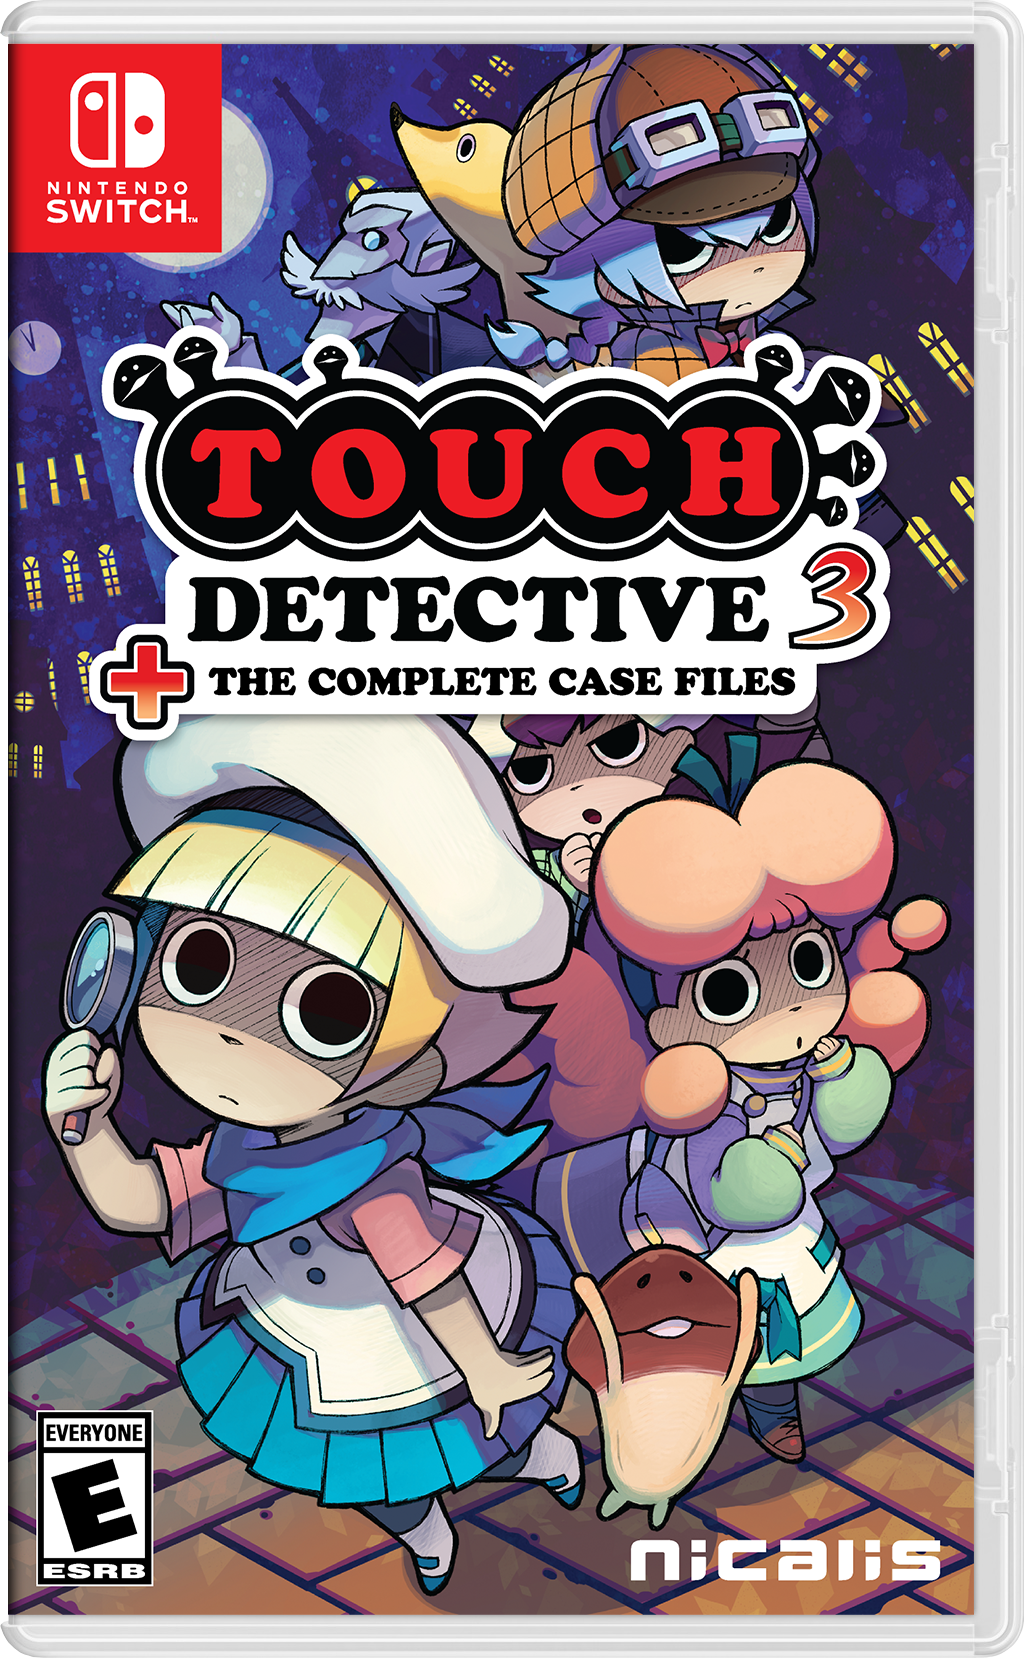 Touch Detective 3 and The Complete Case Files - Nintendo Switch